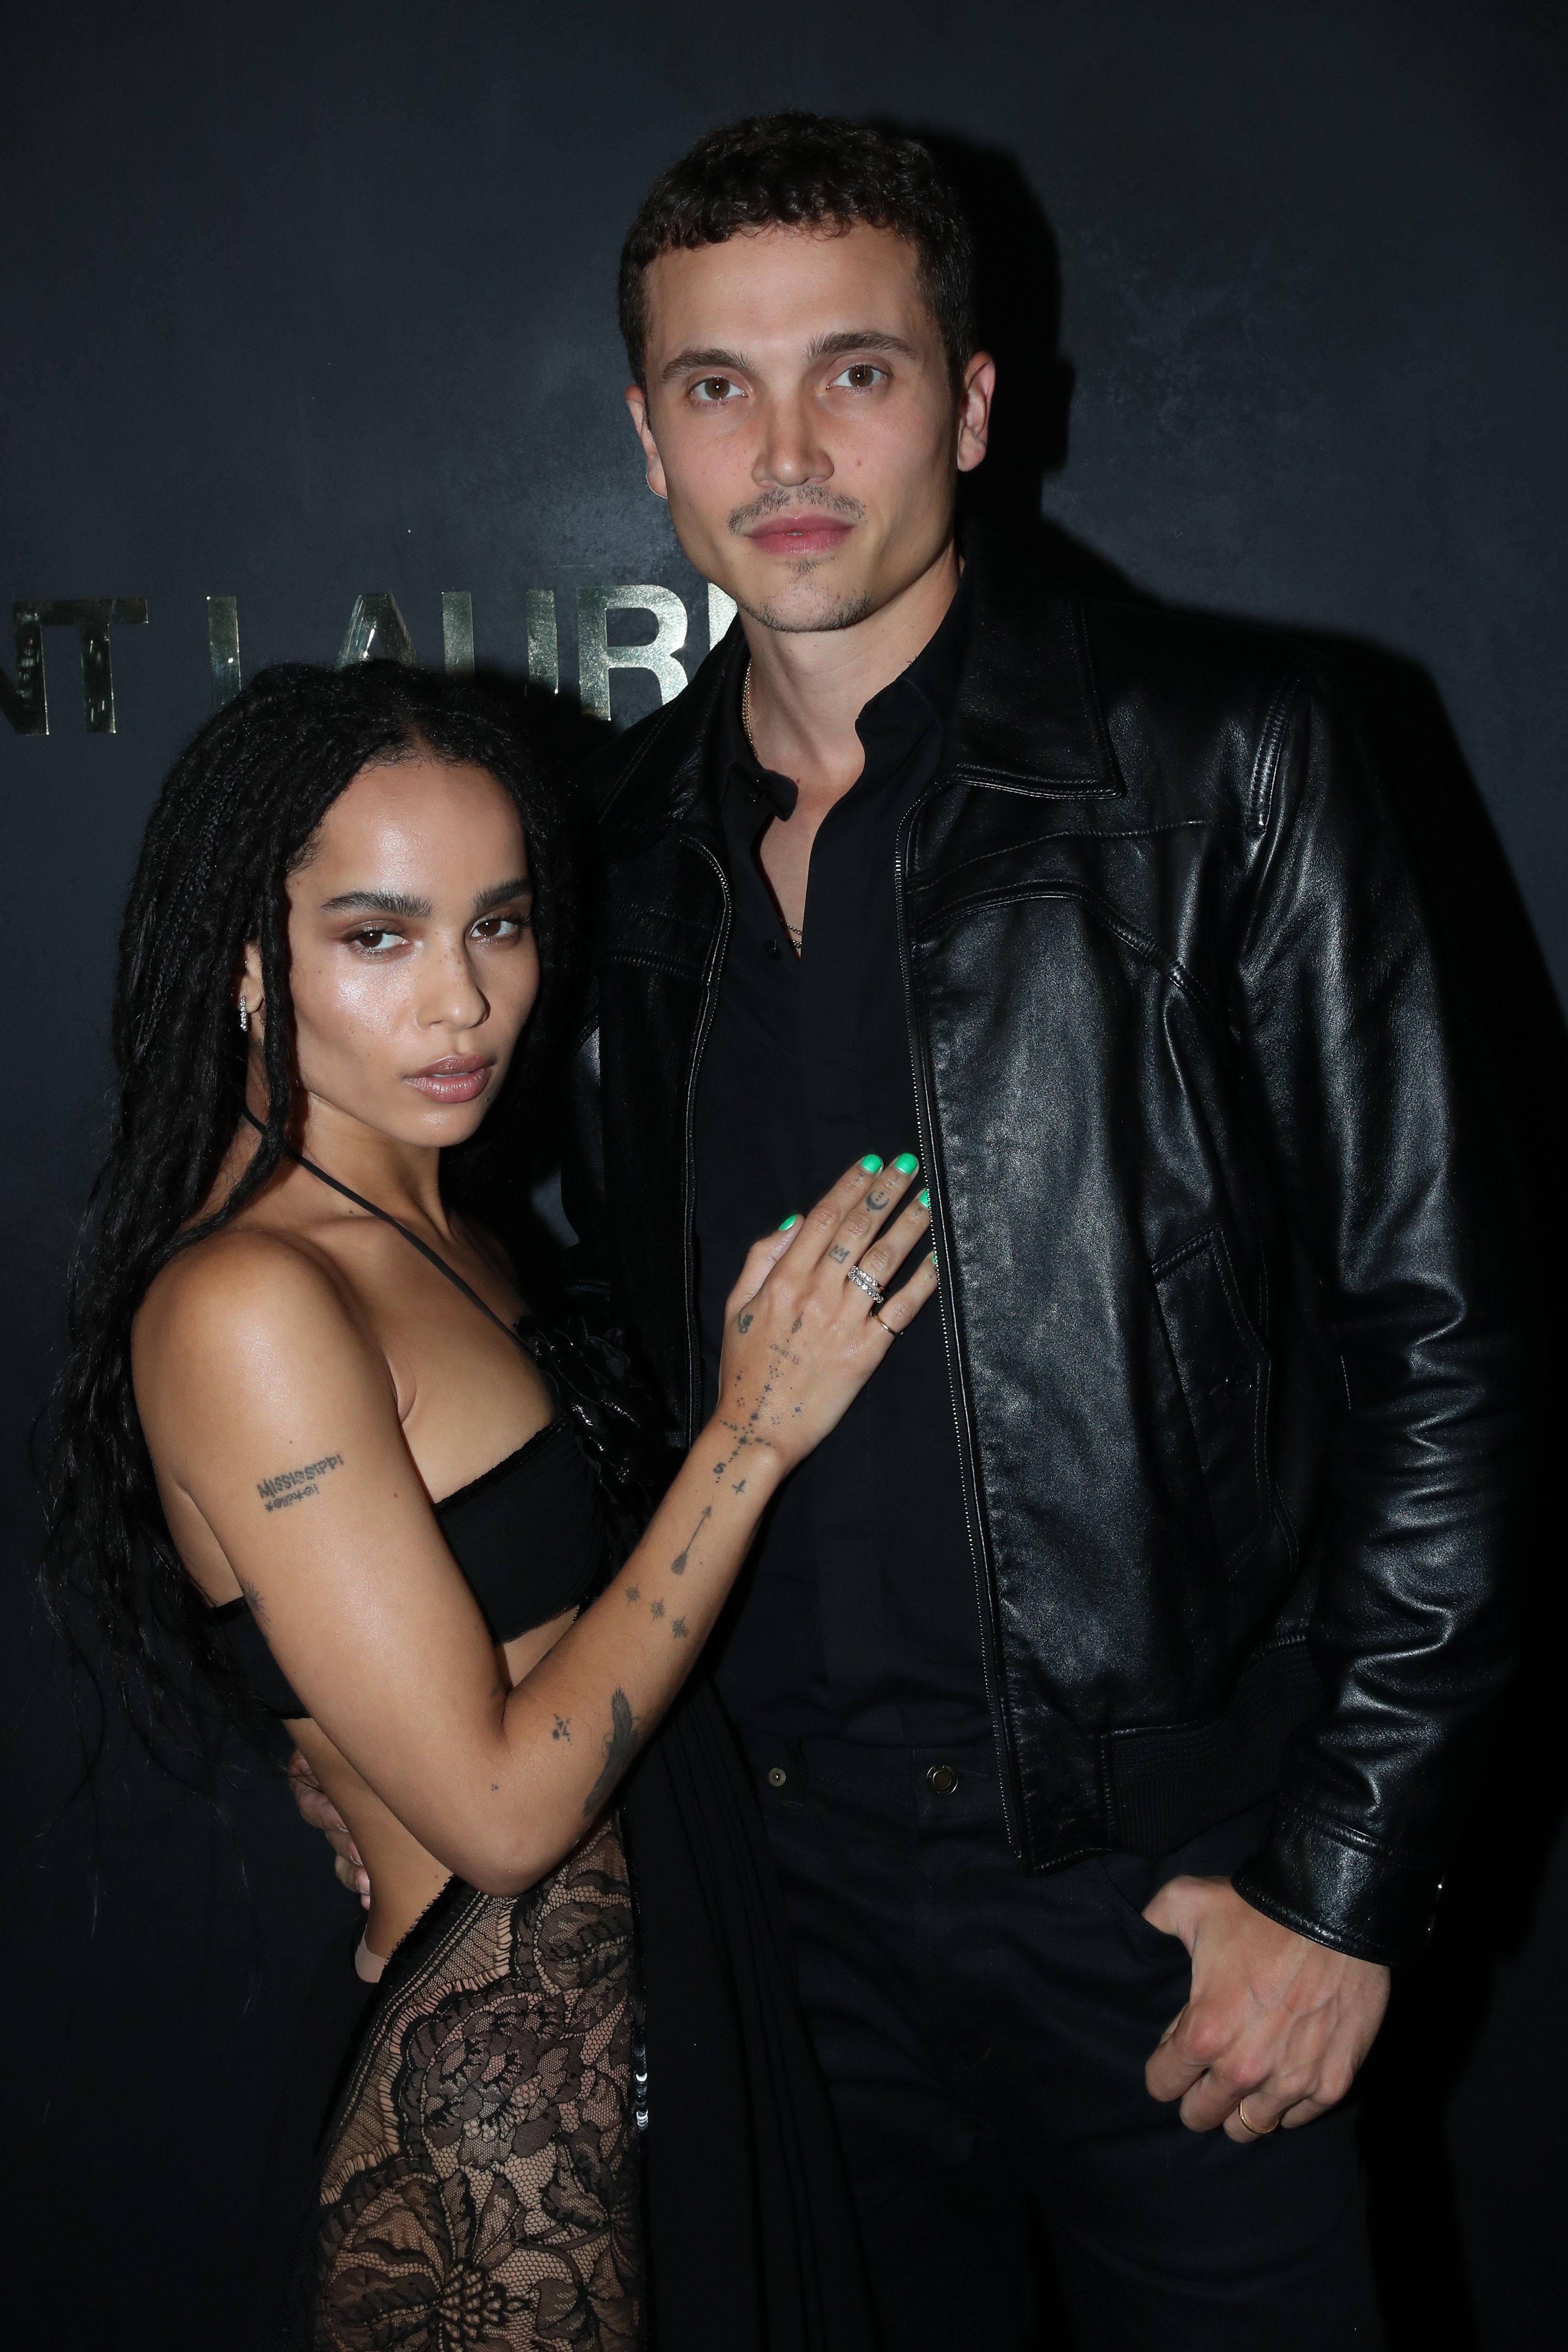 Zoe Kravitz and her companion actor Karl Glusman attend the Saint Laurent Womenswear Spring/Summer 2020 show as part of Paris Fashion Week on September 24, 2019 in Paris, France. | Photo: Getty Images